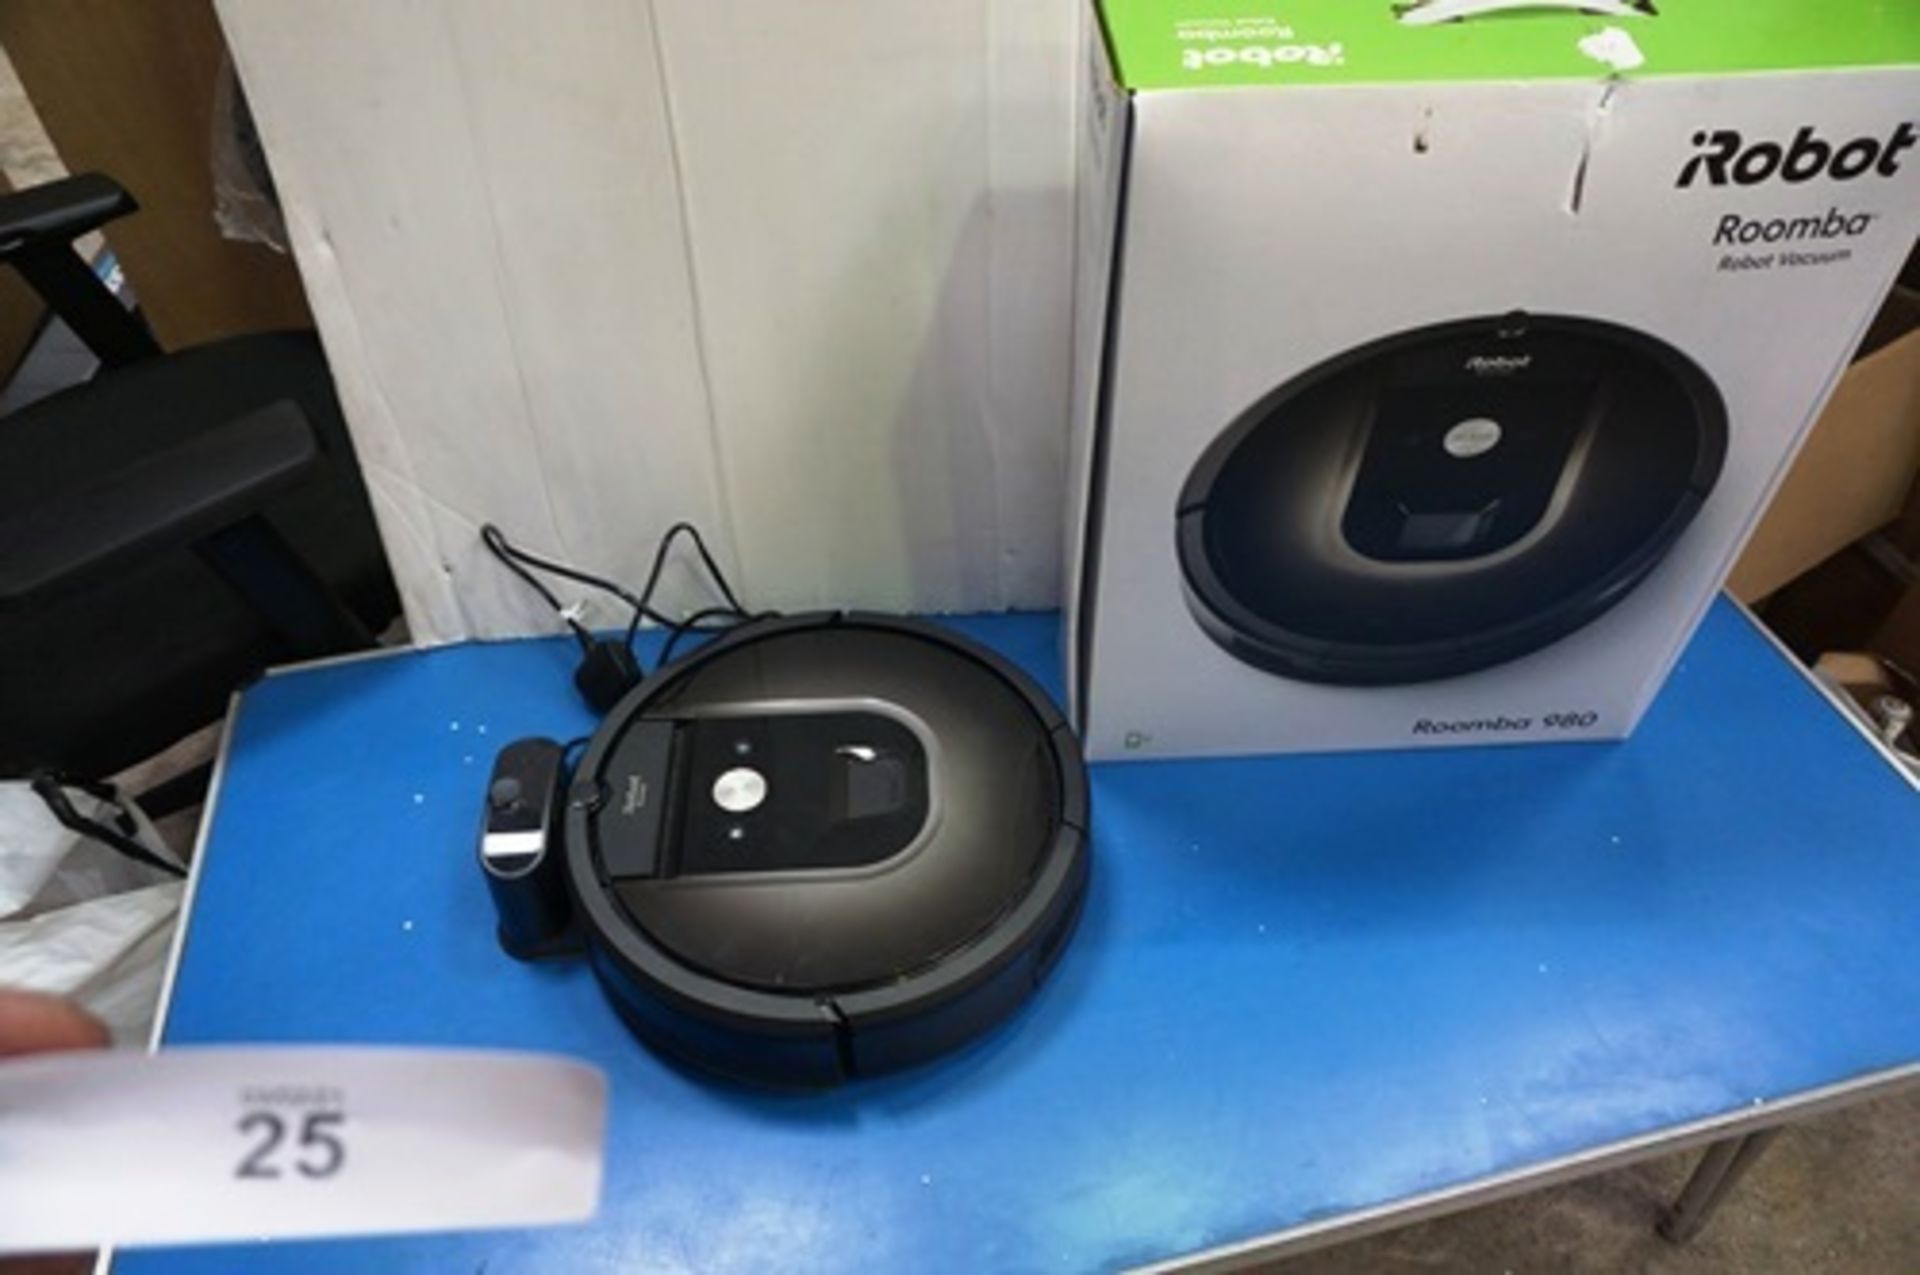 An iRobot Roomba 980 robotic vacuum cleaner, model R980040, Sealed new in box together with an